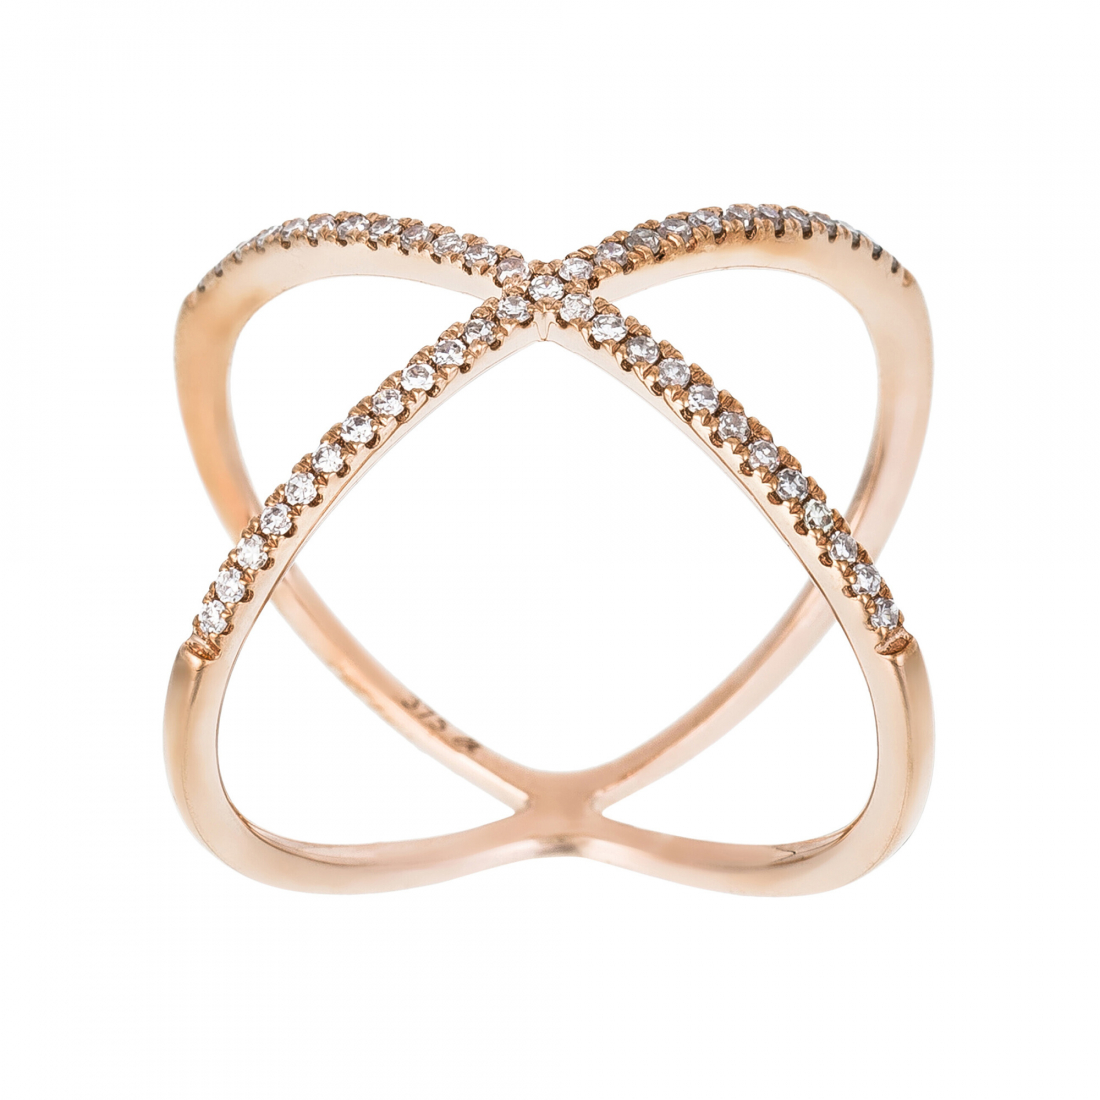 Women's 'Magnifica' Ring